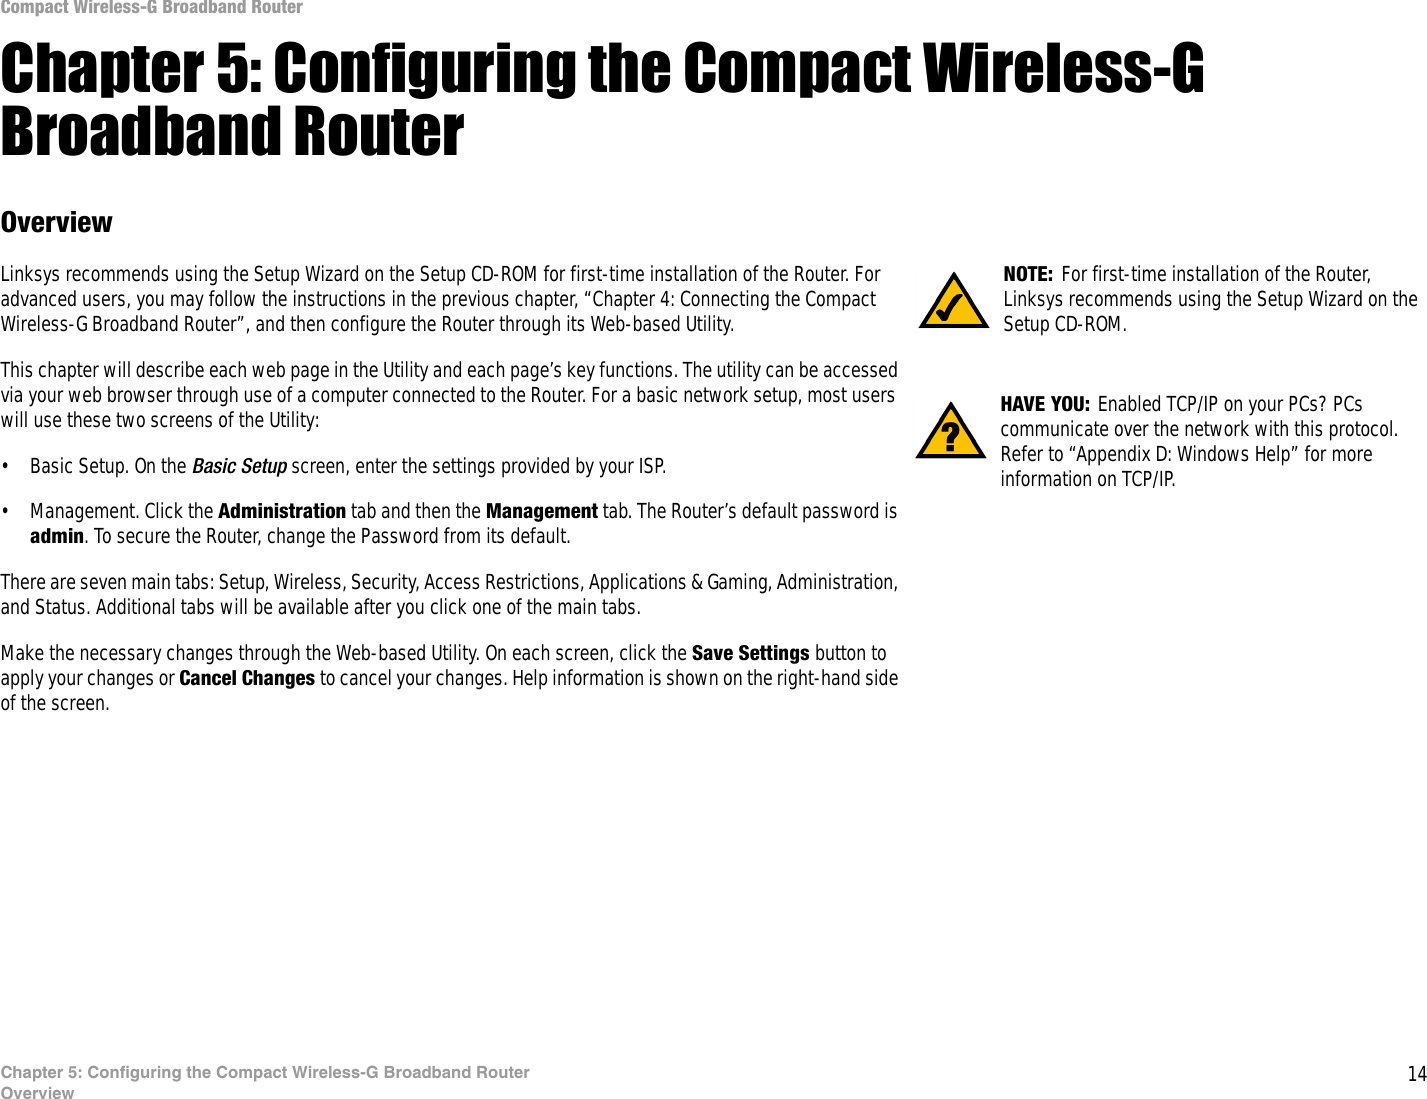 14Chapter 5: Configuring the Compact Wireless-G Broadband RouterOverviewCompact Wireless-G Broadband RouterChapter 5: Configuring the Compact Wireless-G Broadband RouterOverviewLinksys recommends using the Setup Wizard on the Setup CD-ROM for first-time installation of the Router. For advanced users, you may follow the instructions in the previous chapter, “Chapter 4: Connecting the Compact Wireless-G Broadband Router”, and then configure the Router through its Web-based Utility.This chapter will describe each web page in the Utility and each page’s key functions. The utility can be accessed via your web browser through use of a computer connected to the Router. For a basic network setup, most users will use these two screens of the Utility:• Basic Setup. On the Basic Setup screen, enter the settings provided by your ISP.• Management. Click the Administration tab and then the Management tab. The Router’s default password is admin. To secure the Router, change the Password from its default.There are seven main tabs: Setup, Wireless, Security, Access Restrictions, Applications &amp; Gaming, Administration, and Status. Additional tabs will be available after you click one of the main tabs.Make the necessary changes through the Web-based Utility. On each screen, click the Save Settings button to apply your changes or Cancel Changes to cancel your changes. Help information is shown on the right-hand side of the screen. HAVE YOU: Enabled TCP/IP on your PCs? PCs communicate over the network with this protocol. Refer to “Appendix D: Windows Help” for more information on TCP/IP.NOTE: For first-time installation of the Router, Linksys recommends using the Setup Wizard on the Setup CD-ROM.